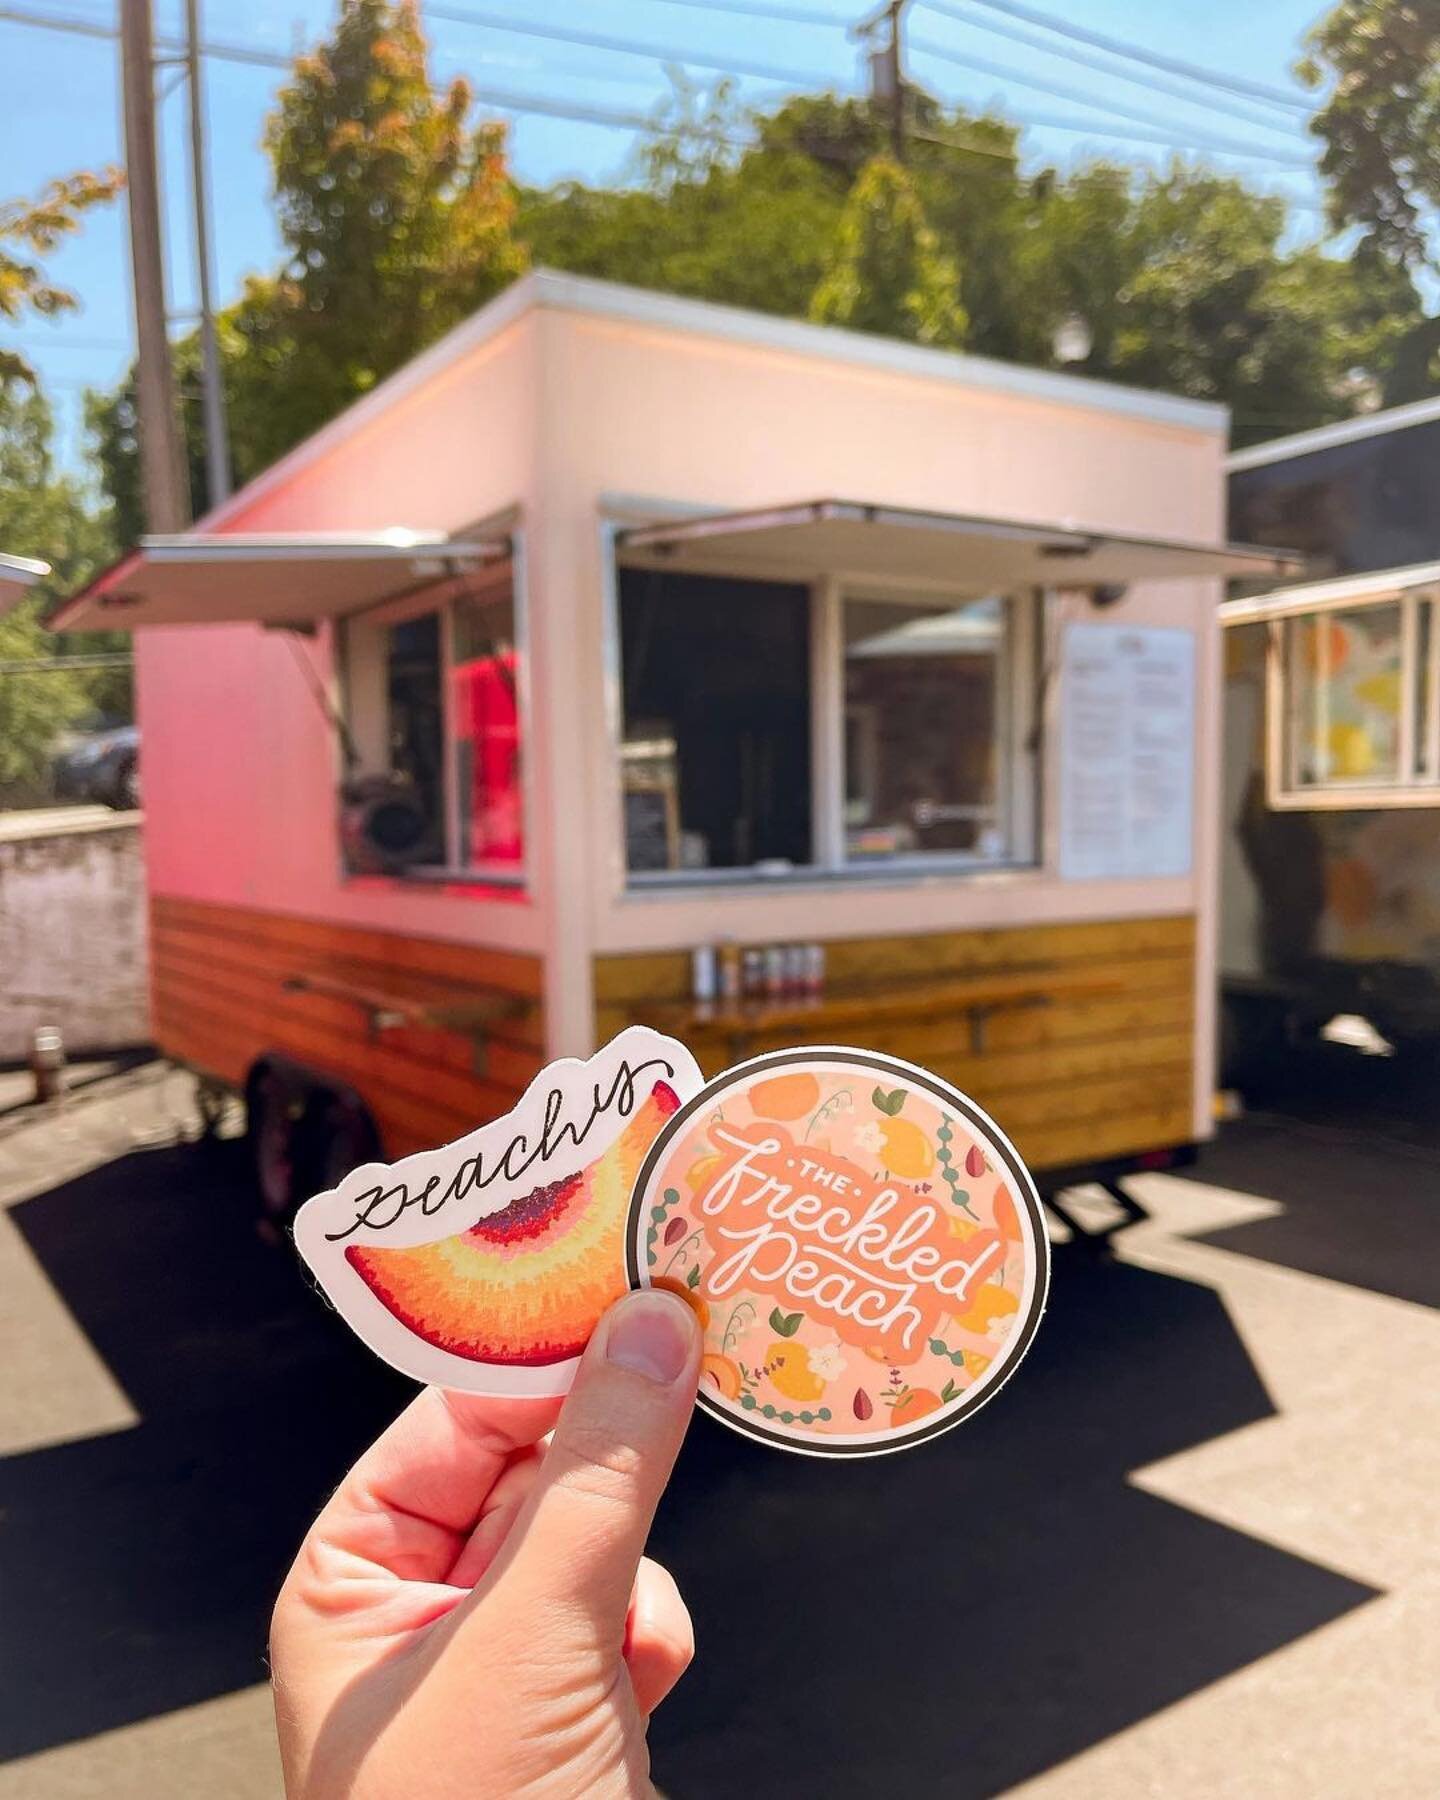 Sweet or savory? Whichever way you lean, it&rsquo;s going to be a good day @_thefreckledpeach 🍑🧇 #Corner14

If you are planning on joining @paddleboardoregon on the Willamette river this evening for &ldquo;Paddle + Pint&rdquo; make sure you visit t